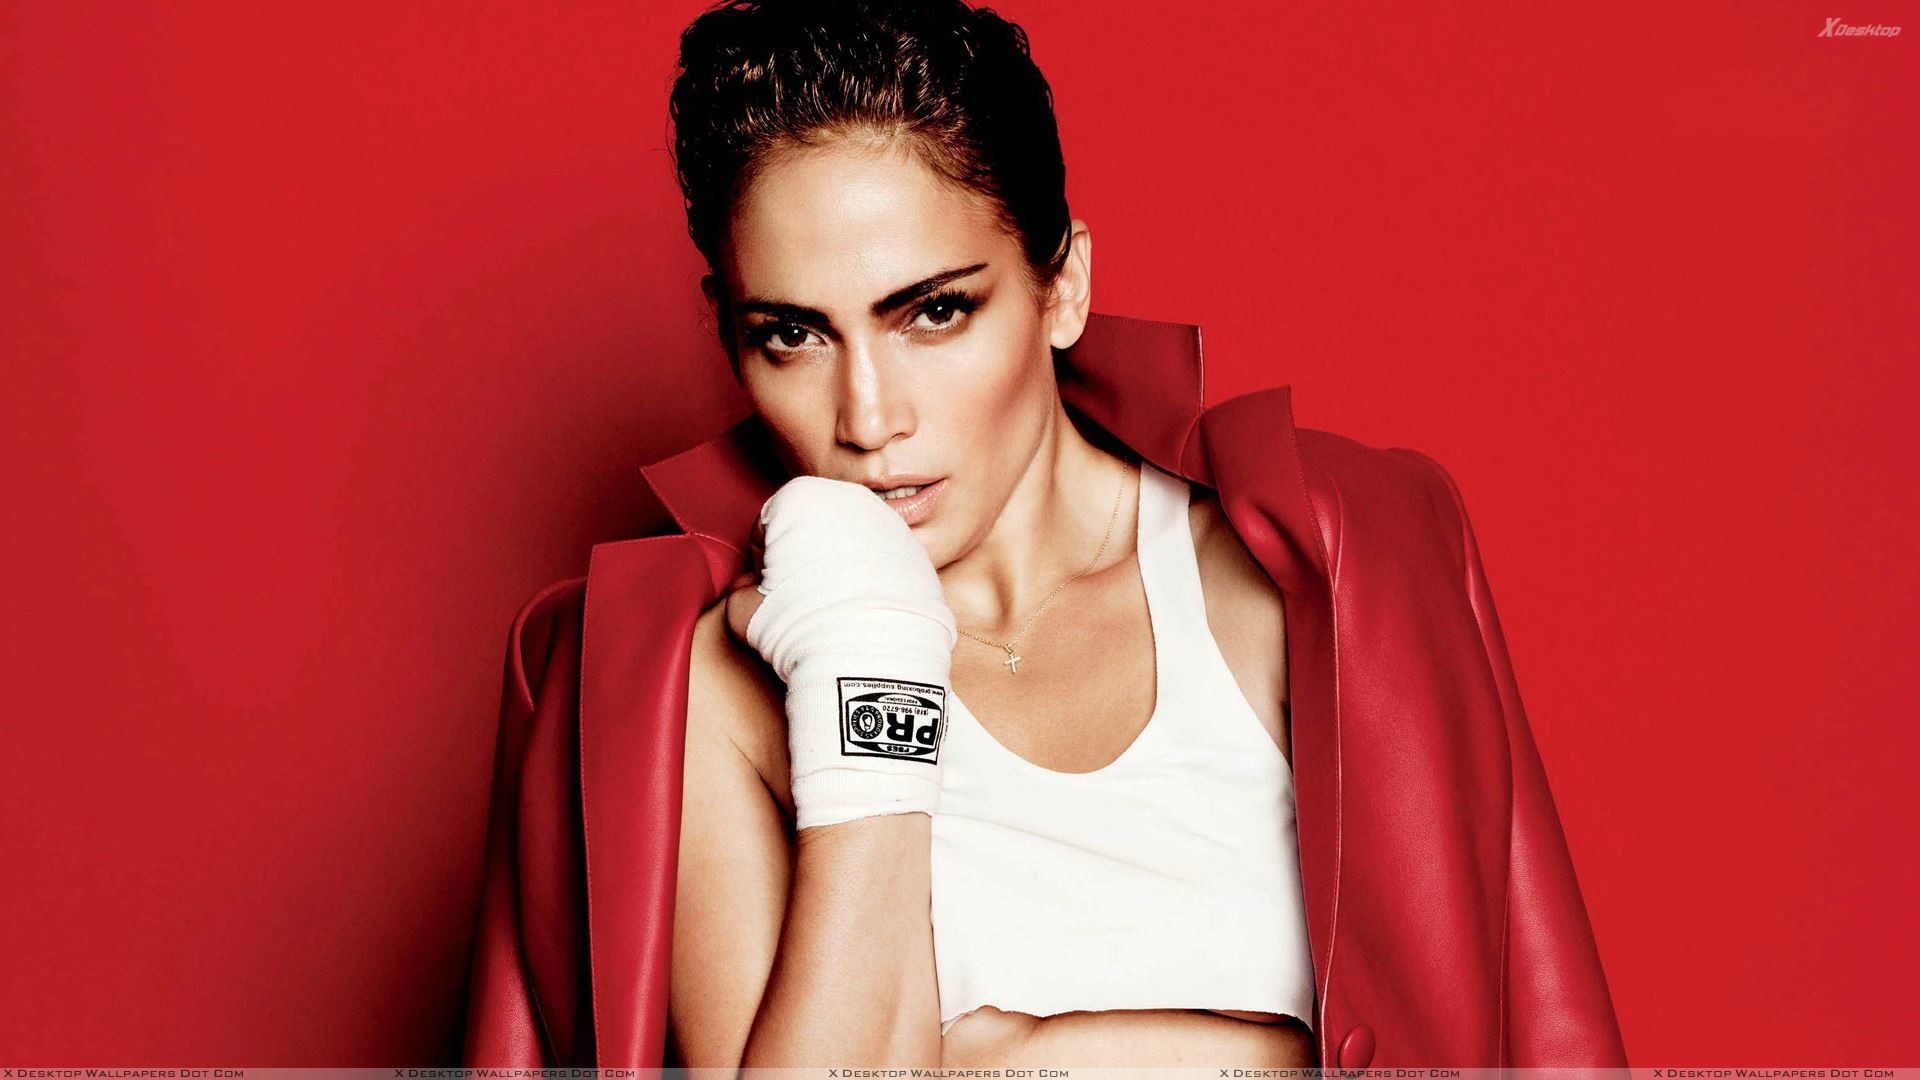 1920x1080 You are viewing wallpaper titled "Jennifer Lopez ...